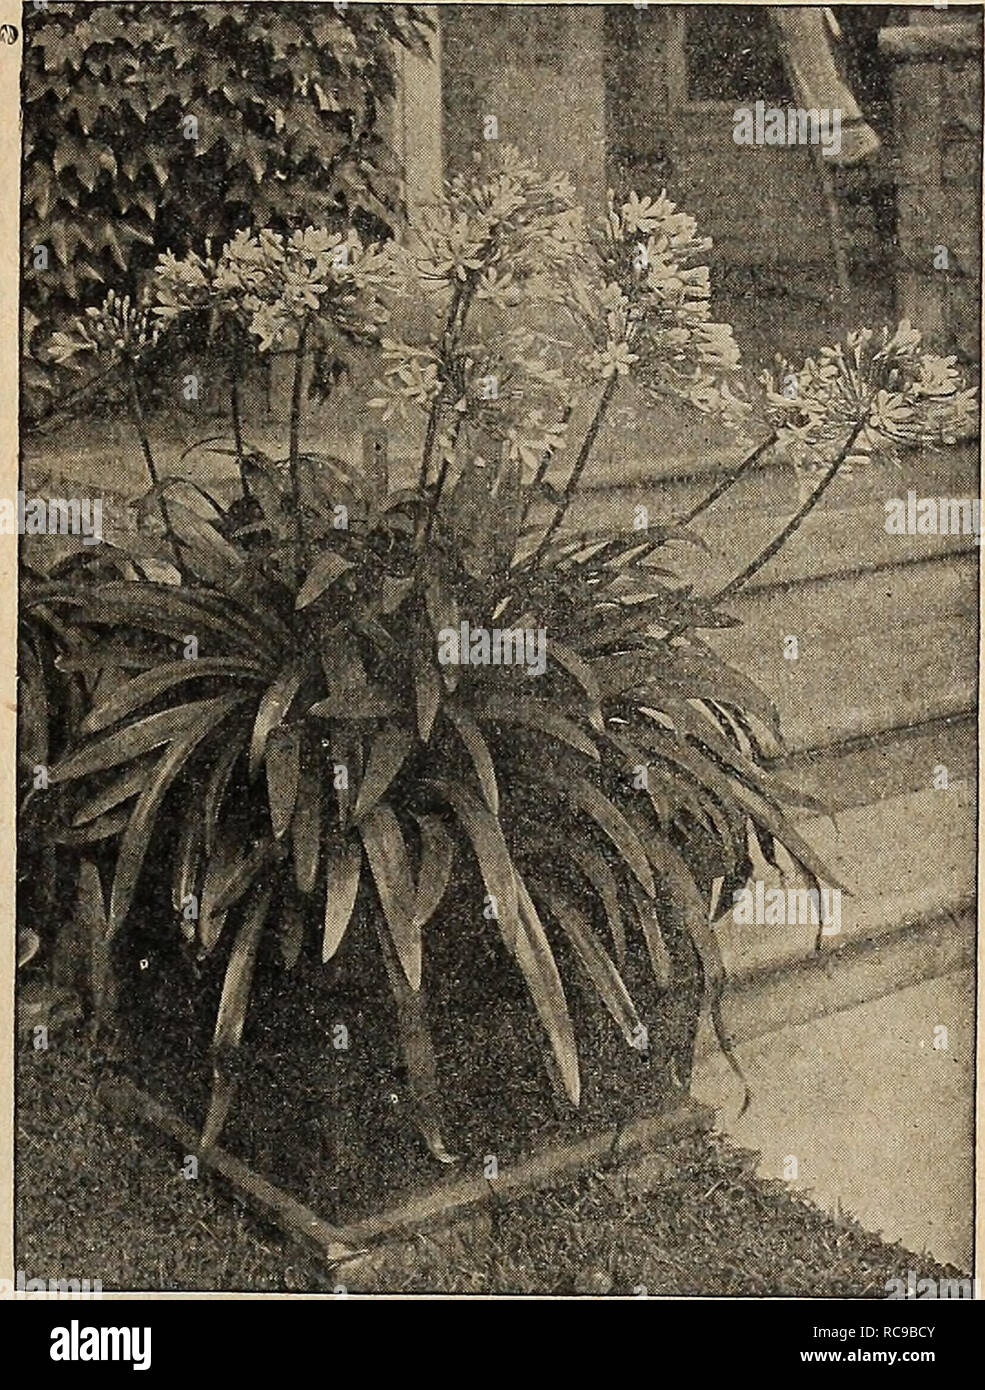 . Dreer's garden book 1920. Seeds Catalogs; Nursery stock Catalogs; Gardening Equipment and supplies Catalogs; Flowers Seeds Catalogs; Vegetables Seeds Catalogs; Fruit Seeds Catalogs. Dreer's American Hybrid Amaryllis Agapanthus Umbellatus AMORPHOPHALLUS (Devil's Tongue, or Snake Palm) Rlvieri. Particularly handsome plant for growing either in clumps or as a solitary specimen. Should be planted in May in warm, sunny situation in extra rich soil; the flowers ap- pear before the leaves and rise to a height of 2 feet and re- semble a gigantic black Calla. This is soon followed by the massive trop Stock Photo